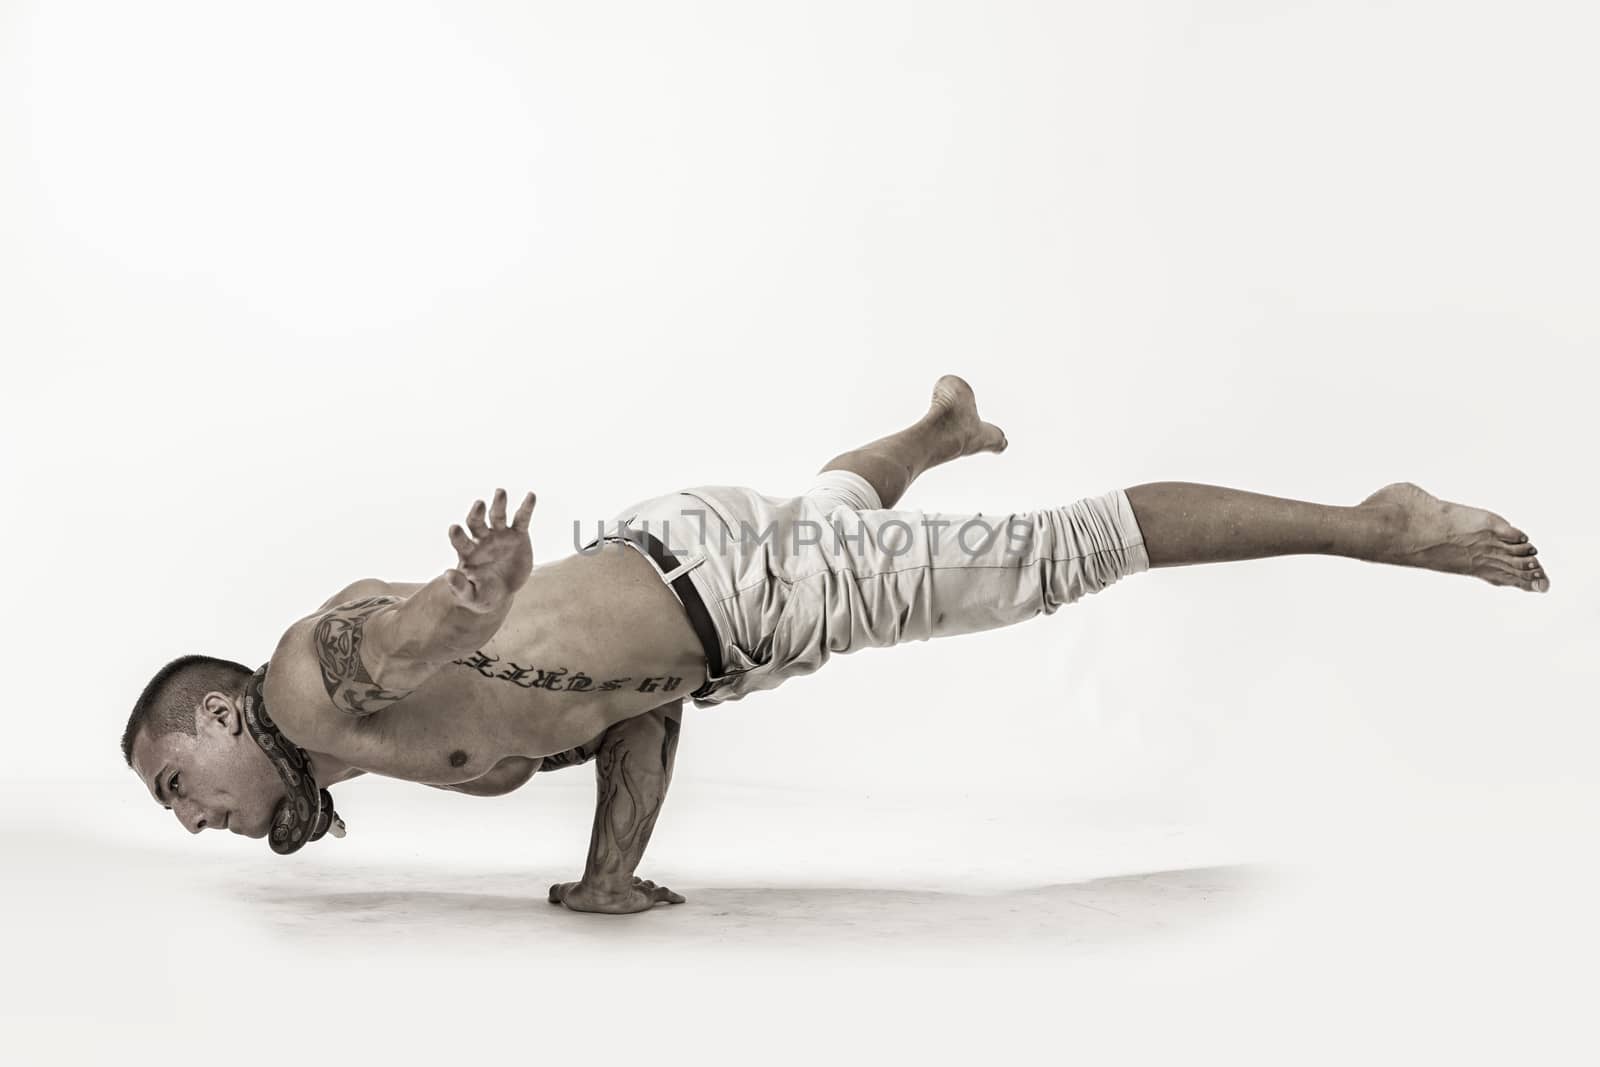 Muscular Shirtless Male Acrobatic Dancer Balancing on Arm and Hand in Studio Isolated on White Background